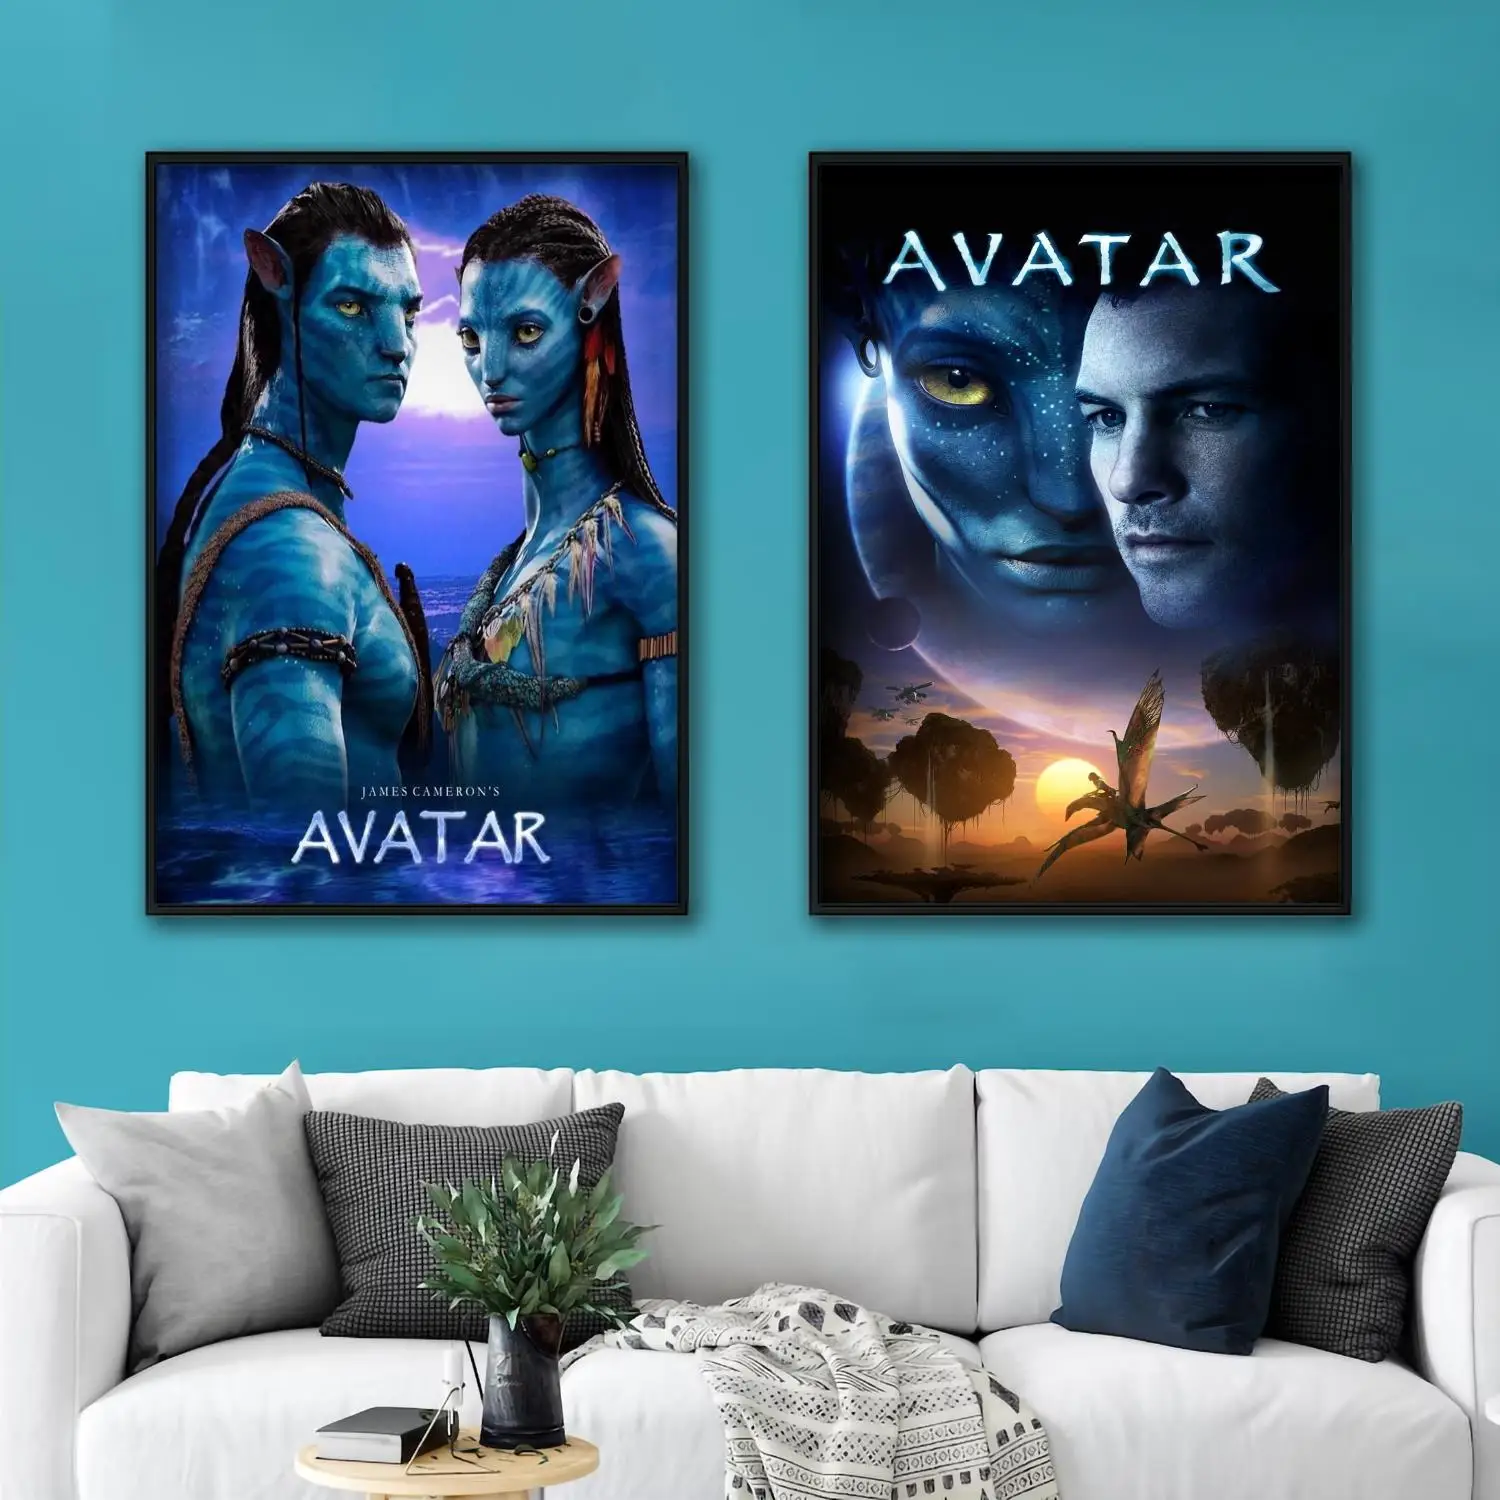 

avatar Movie Decorative Canvas Posters Room Bar Cafe Decor Gift Print Art Wall Paintings